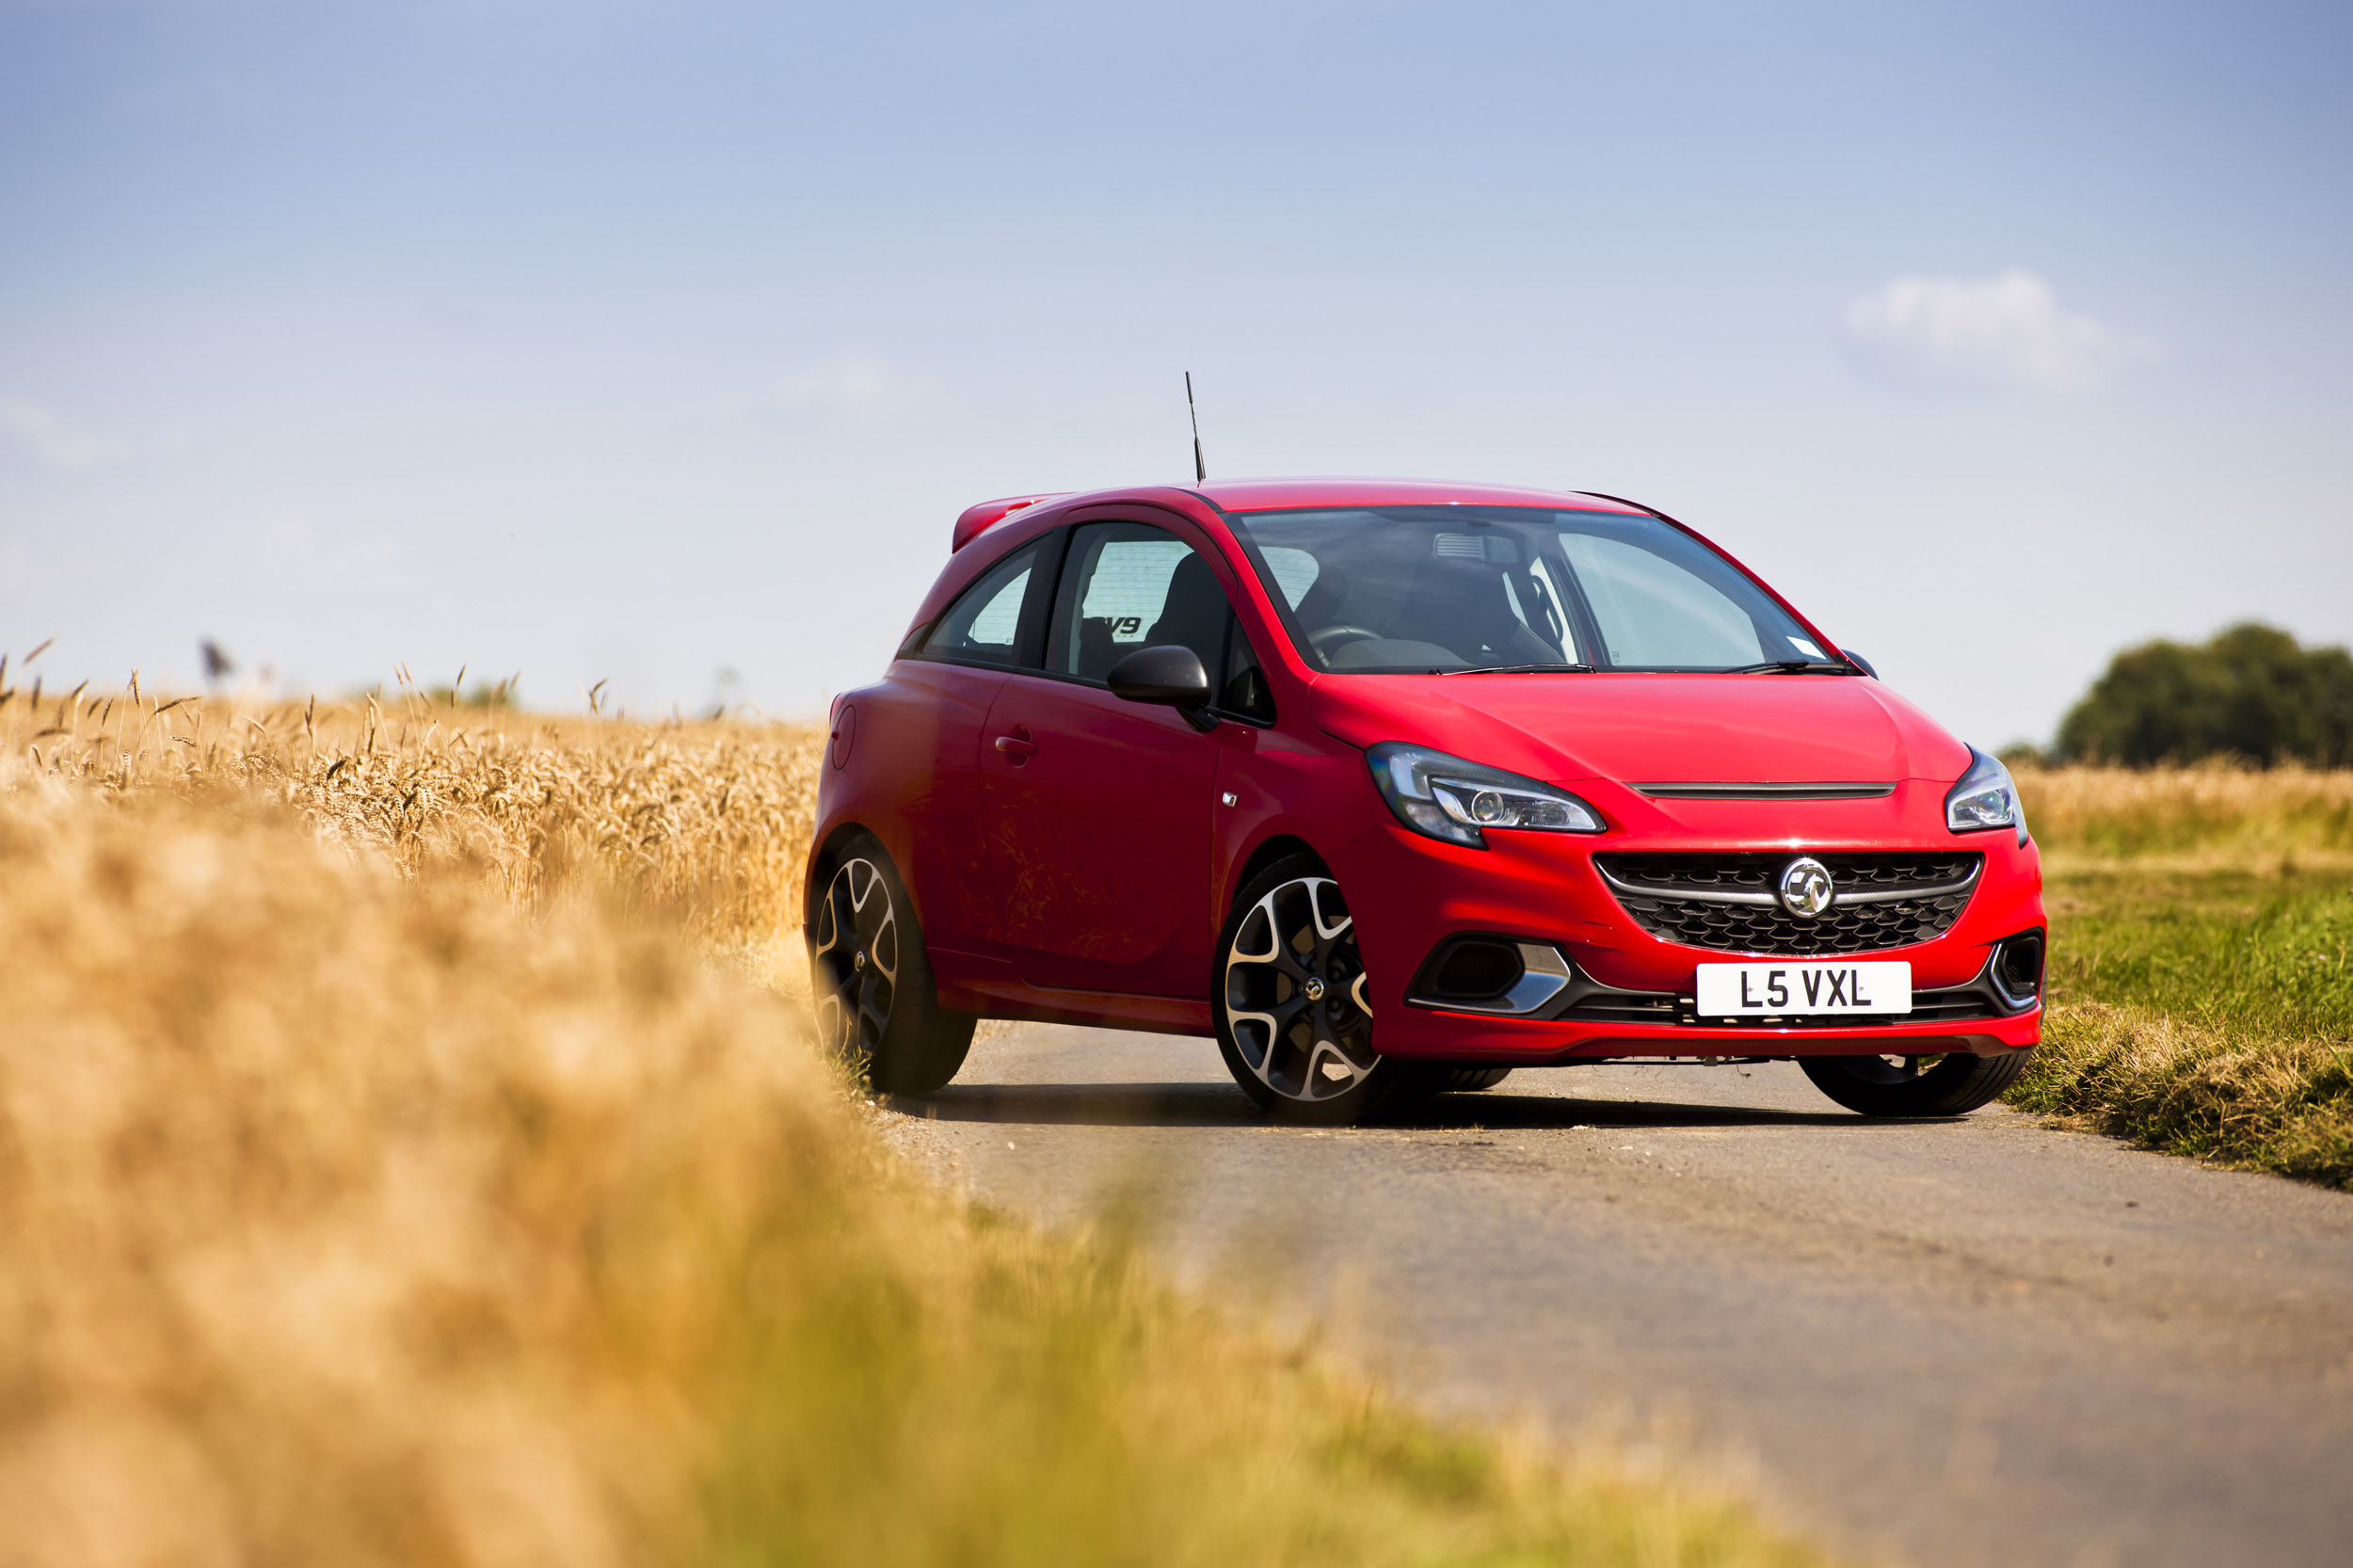 Vauxhall Corsa Vxr Review Prices Specs And 0 60 Time Evo